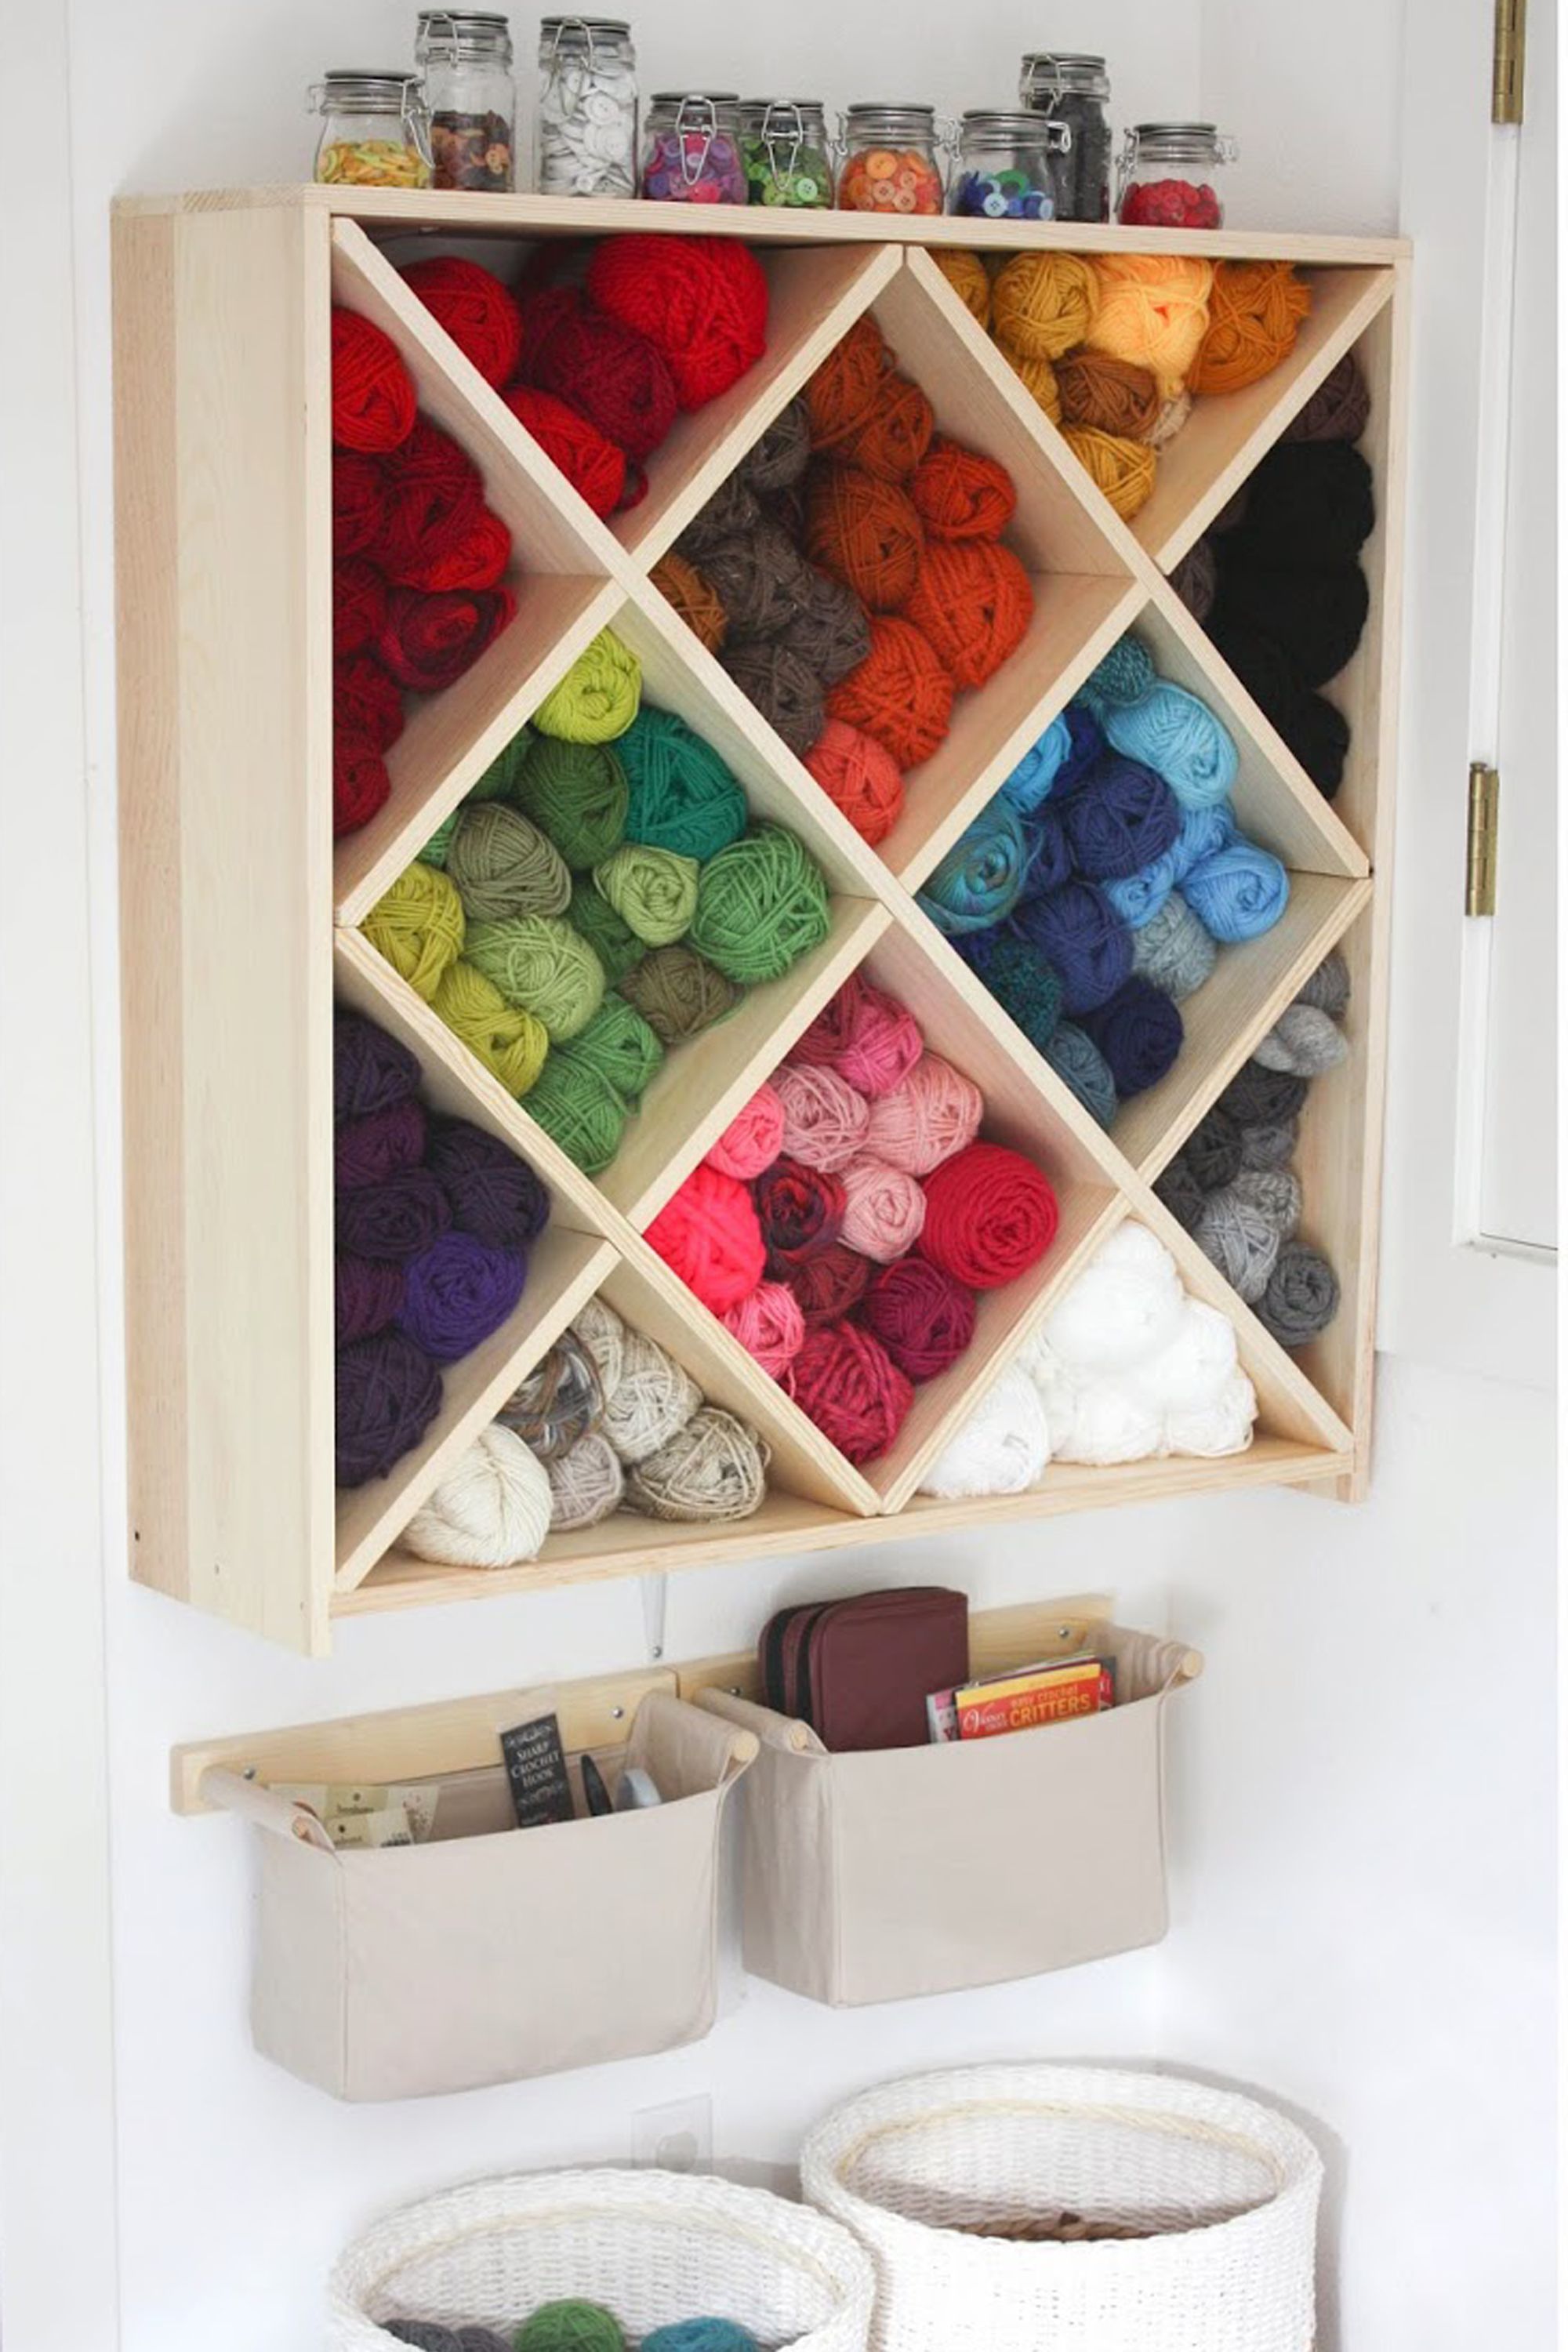 Craft Organizer Pack - Solutions - Your Organized Living Store